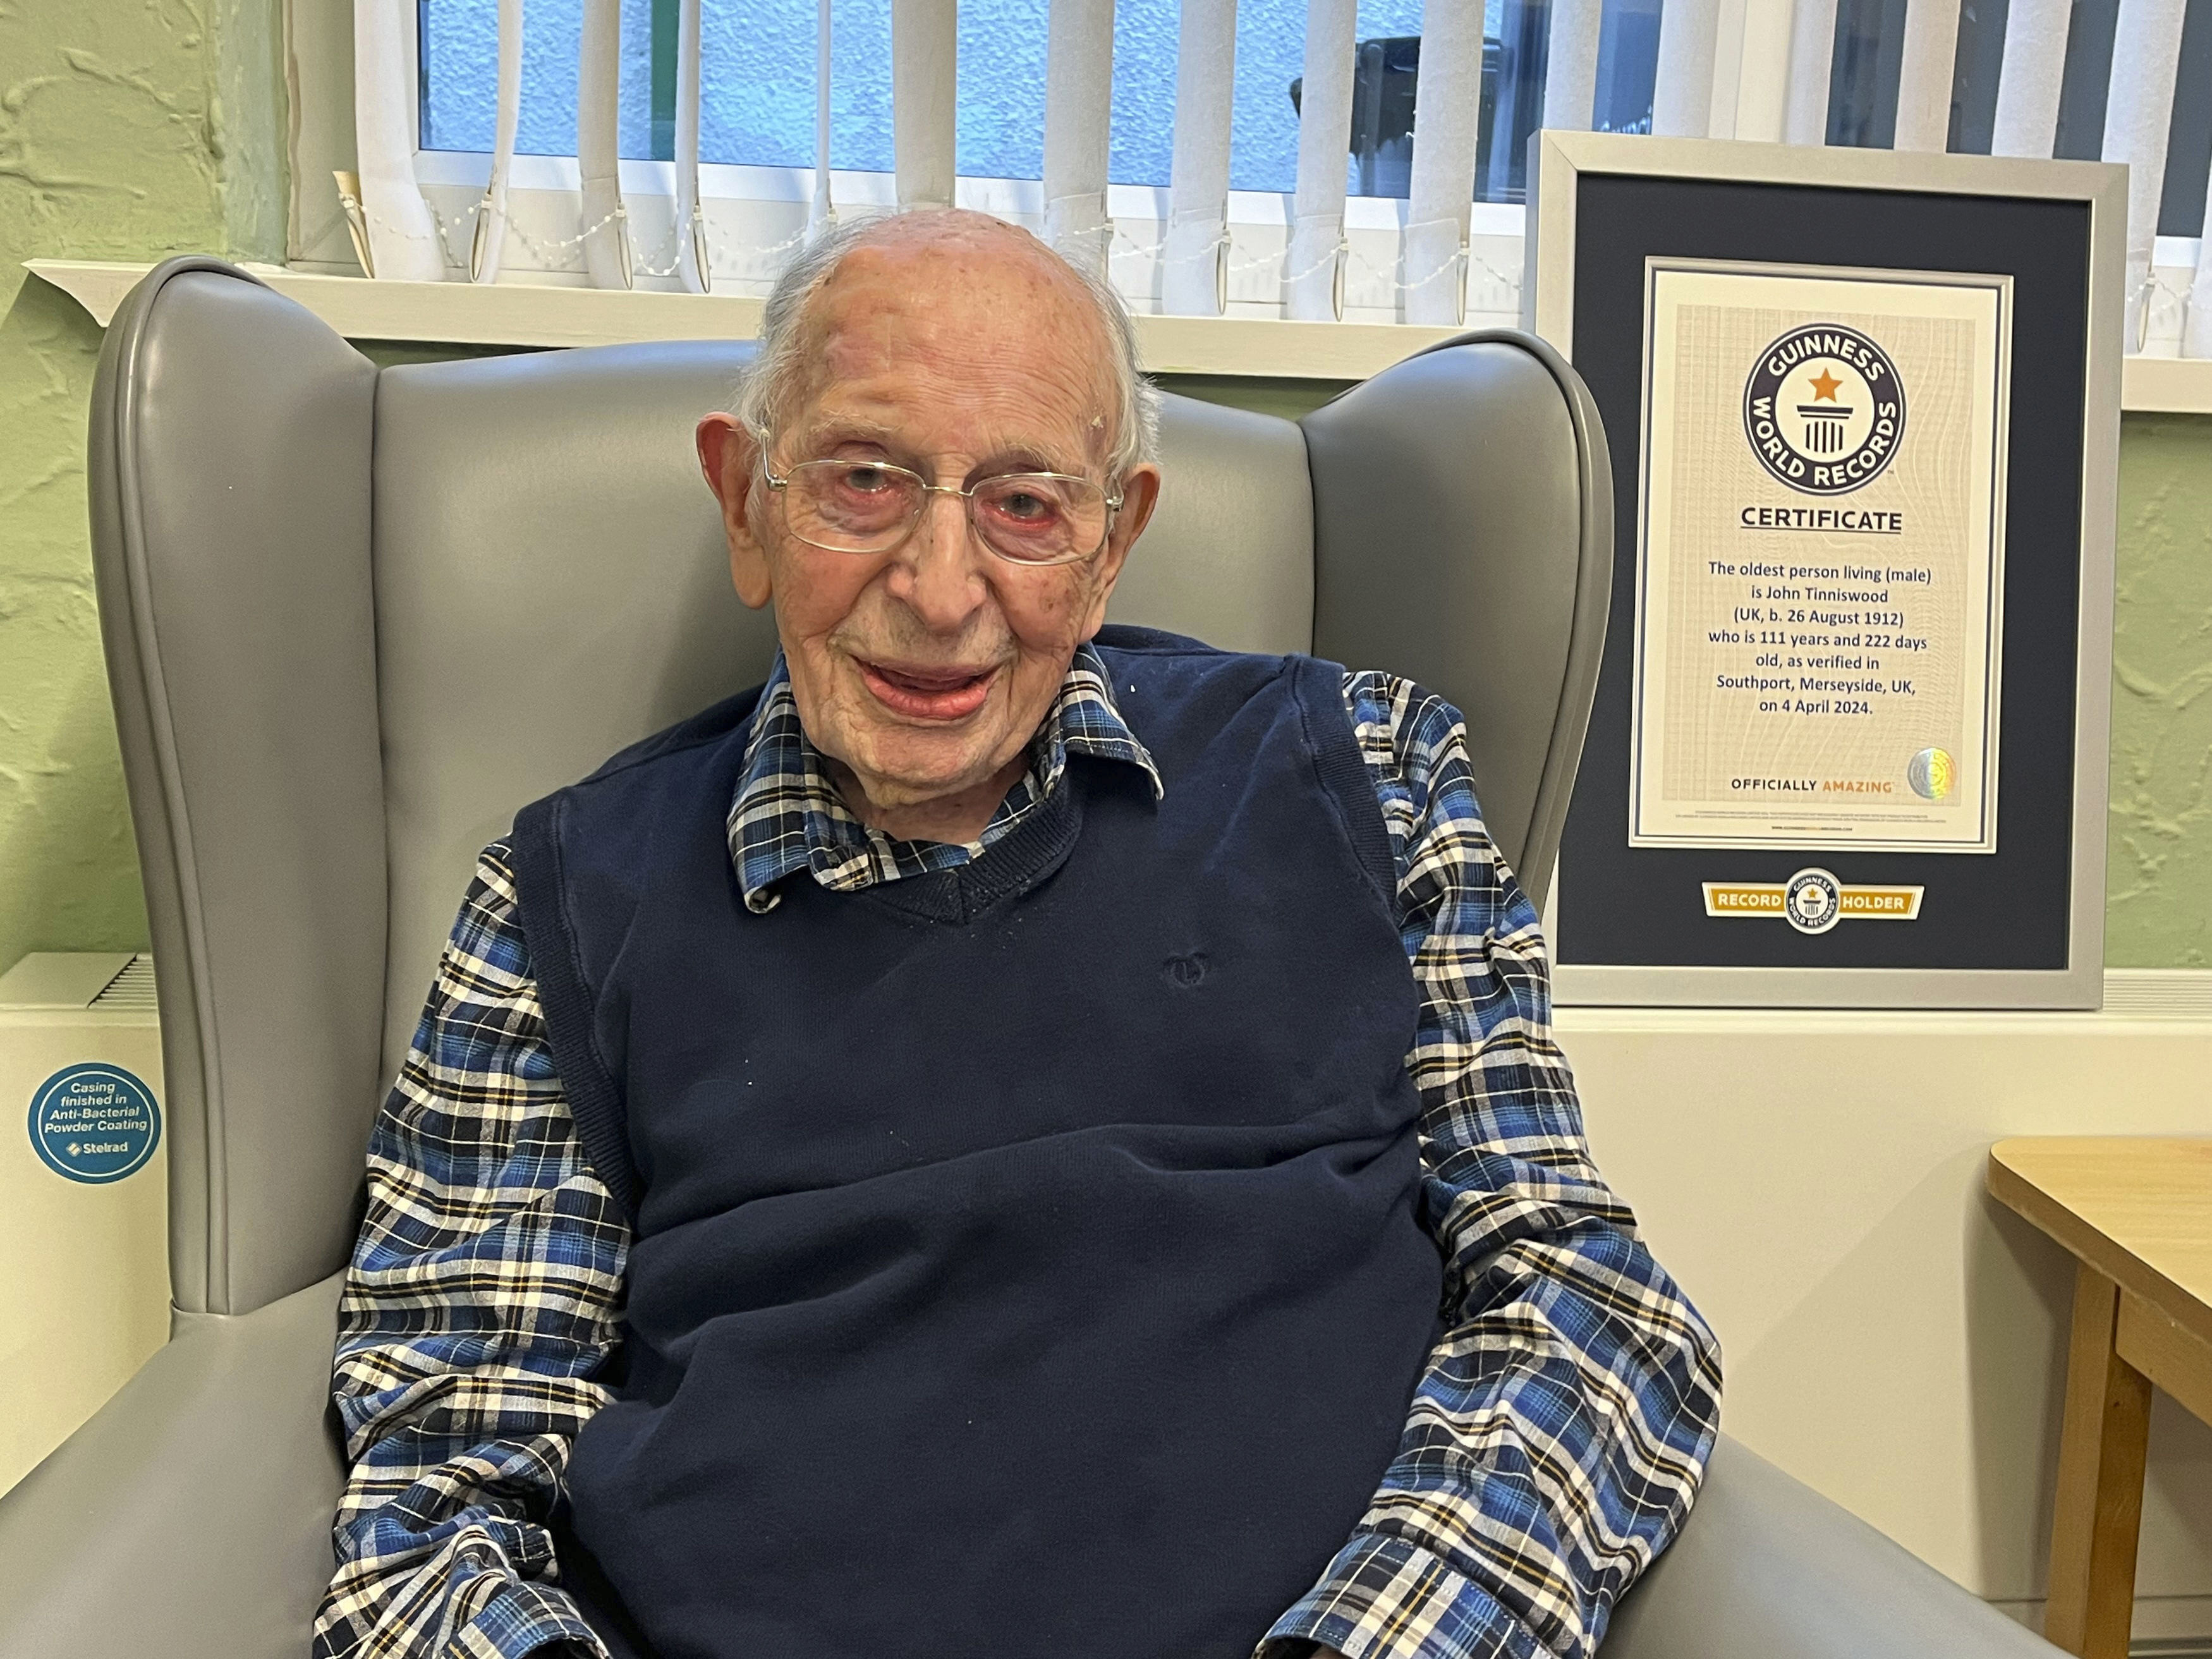 World’s oldest man John Tinniswood, 111, poses with his certificate from Guinness World Records in Southport, Britain, on Thursday. Photo: Guinness World Records via AP